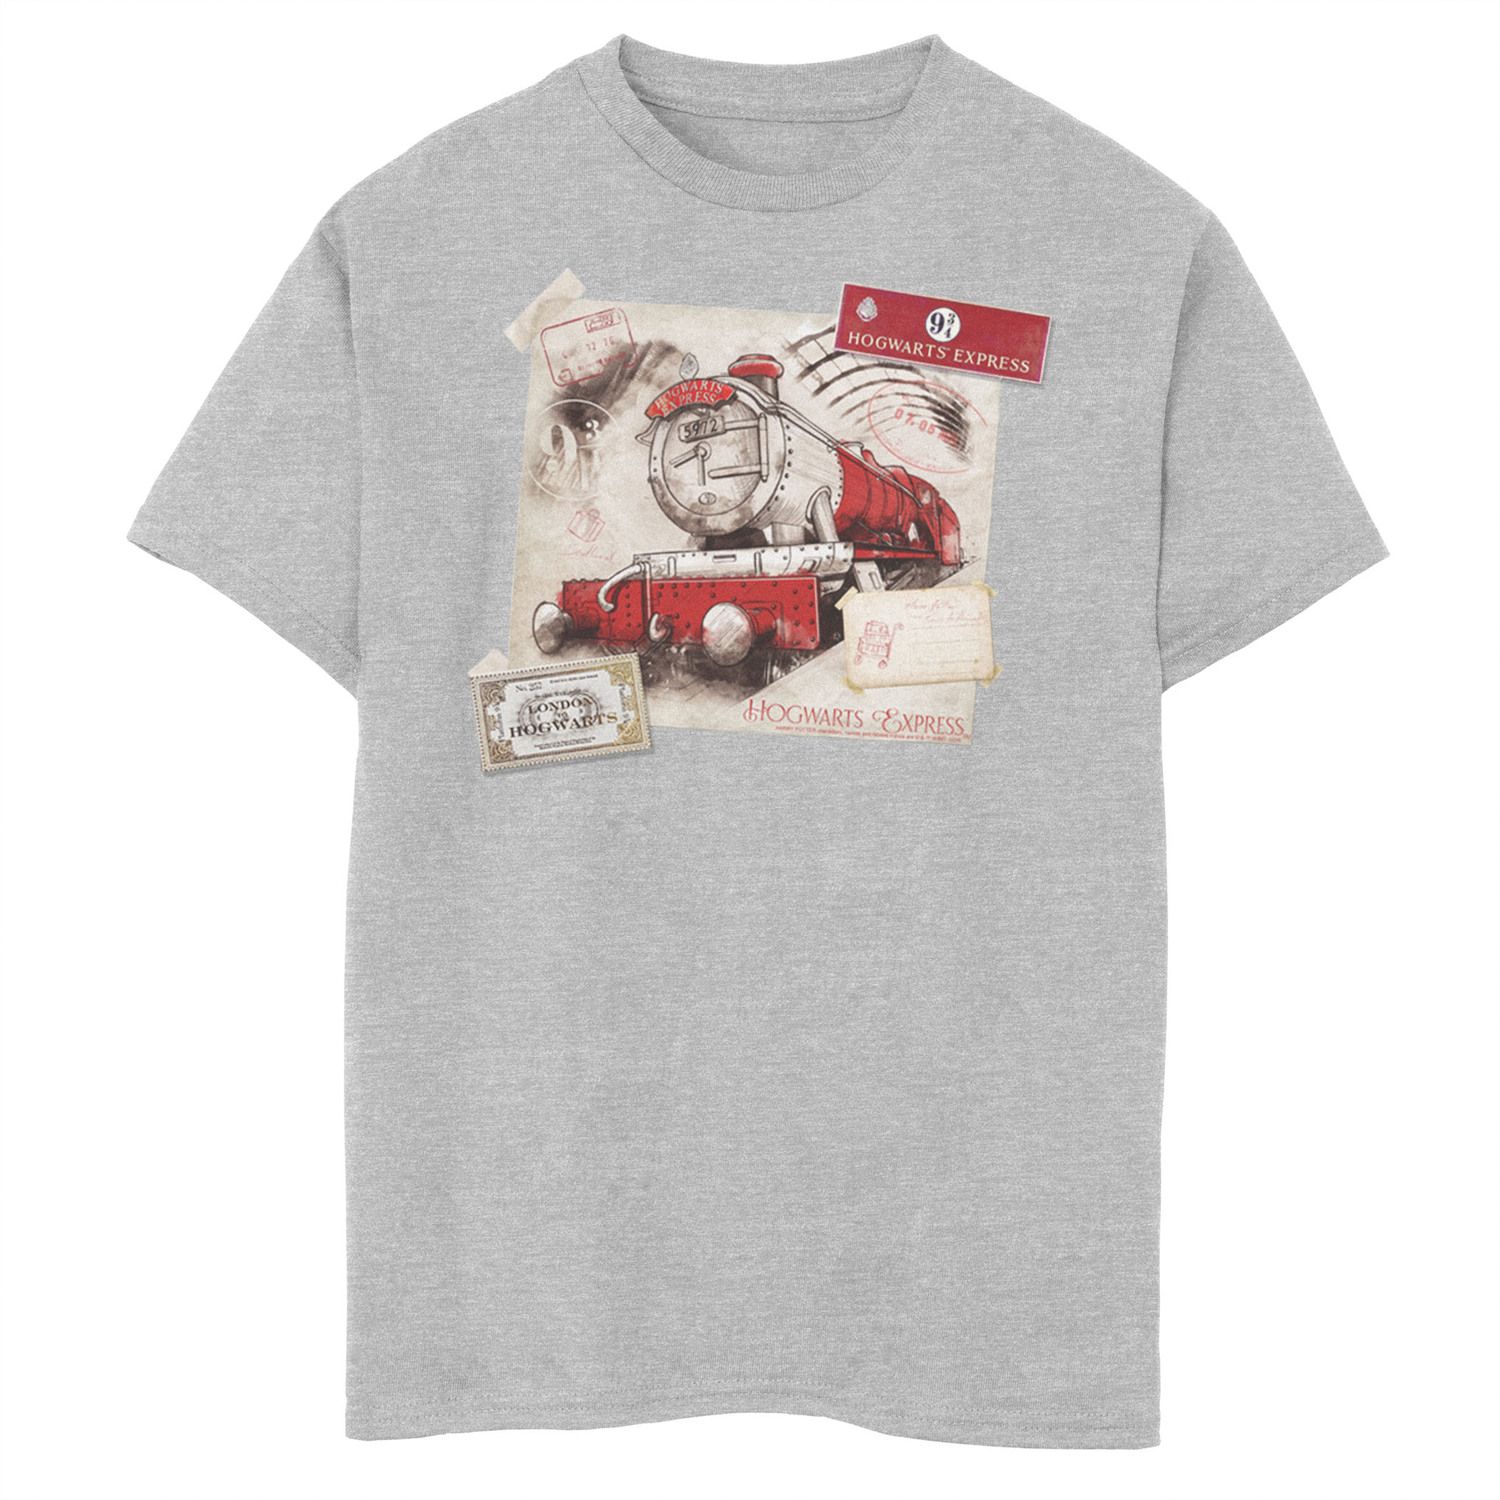 Image for Harry Potter Boys 8-20 Hogwarts Express Post Card Graphic Tee at Kohl's.